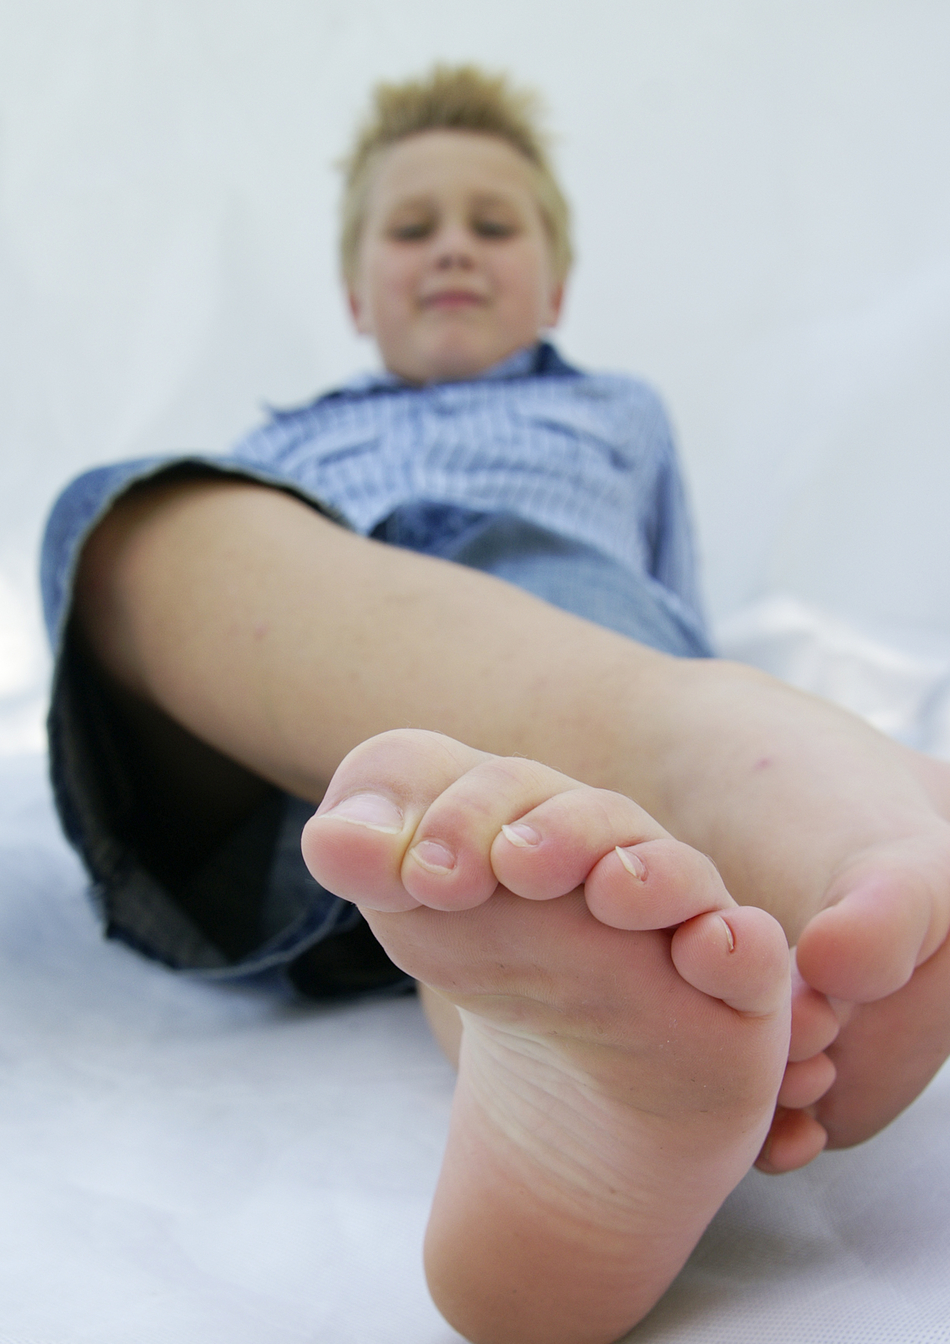 What to Do About Your Child’s Ingrown Toenail